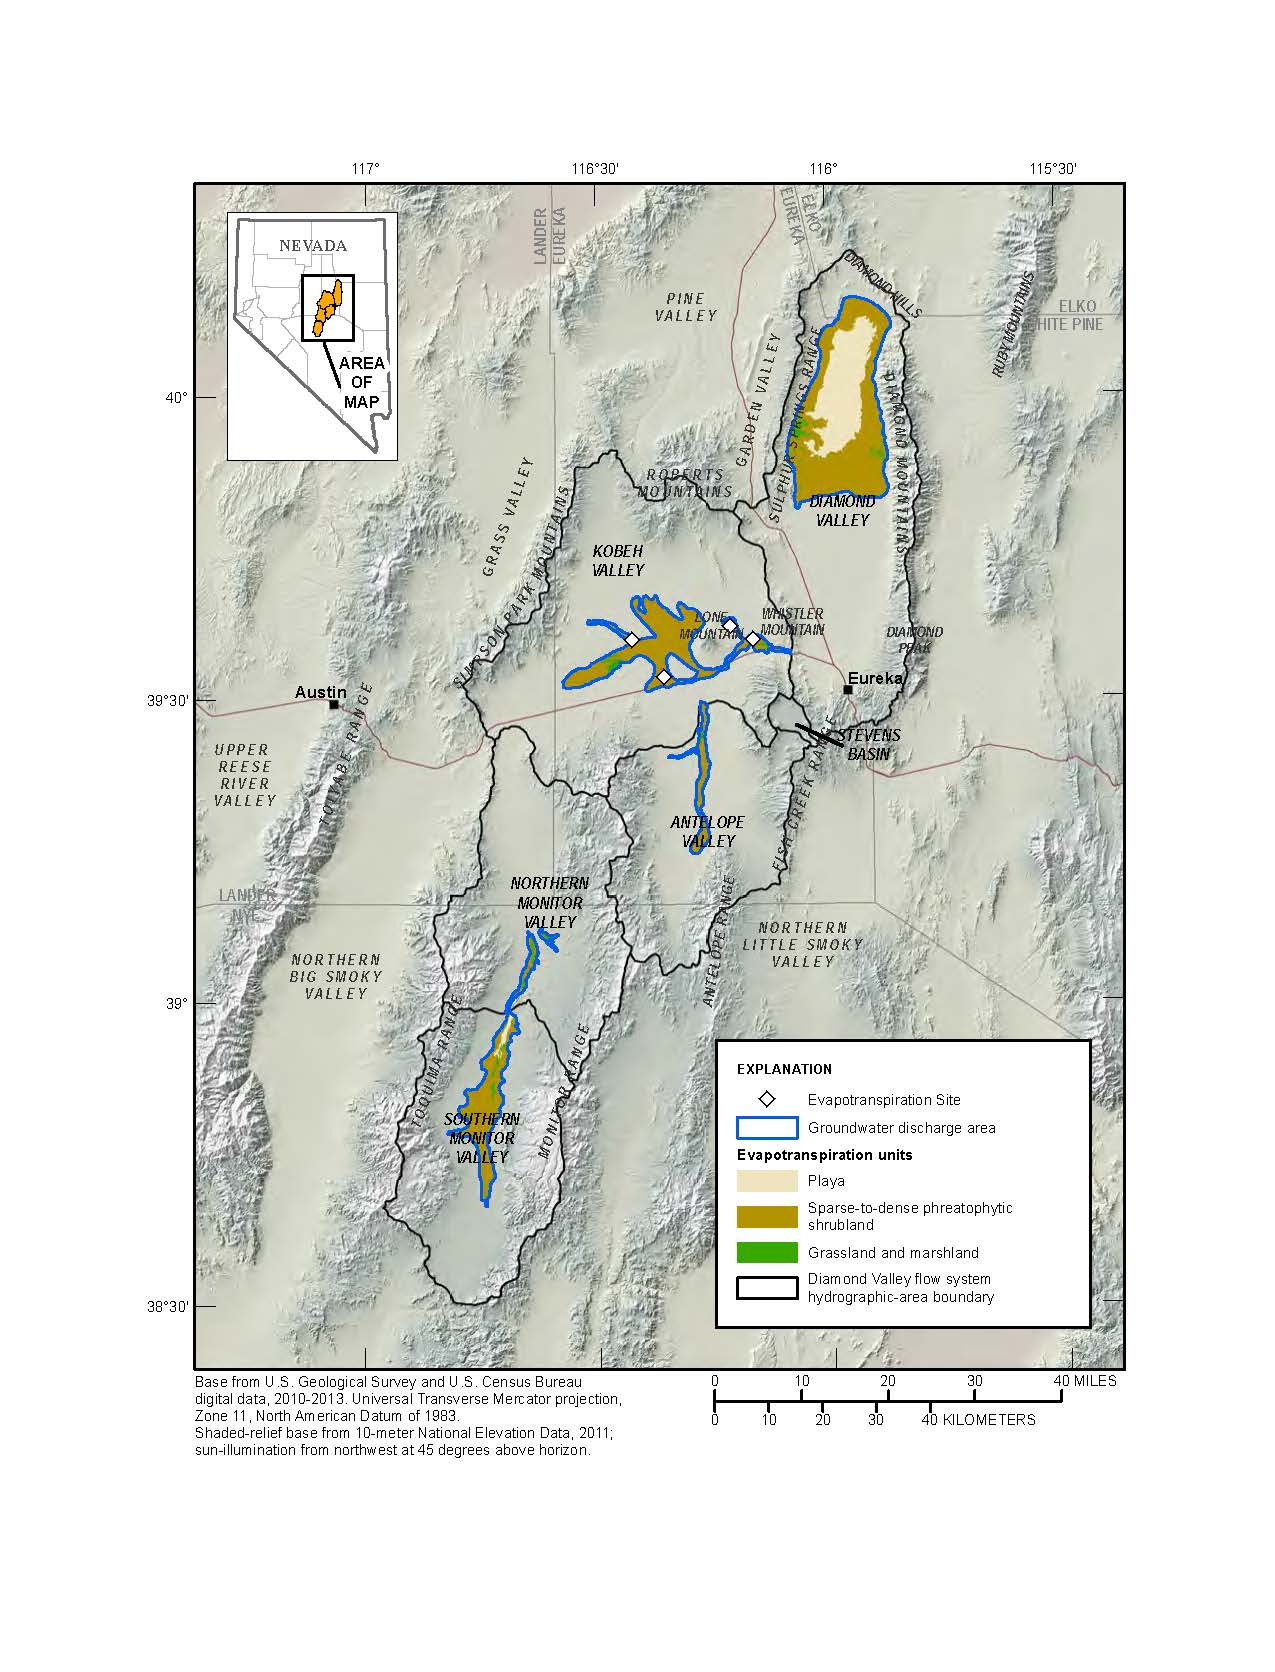 Map showing groundwater discharge areas and evapotranspiration units for various vegetation and soil conditions, Diamond Valley Flow System, Nevada.